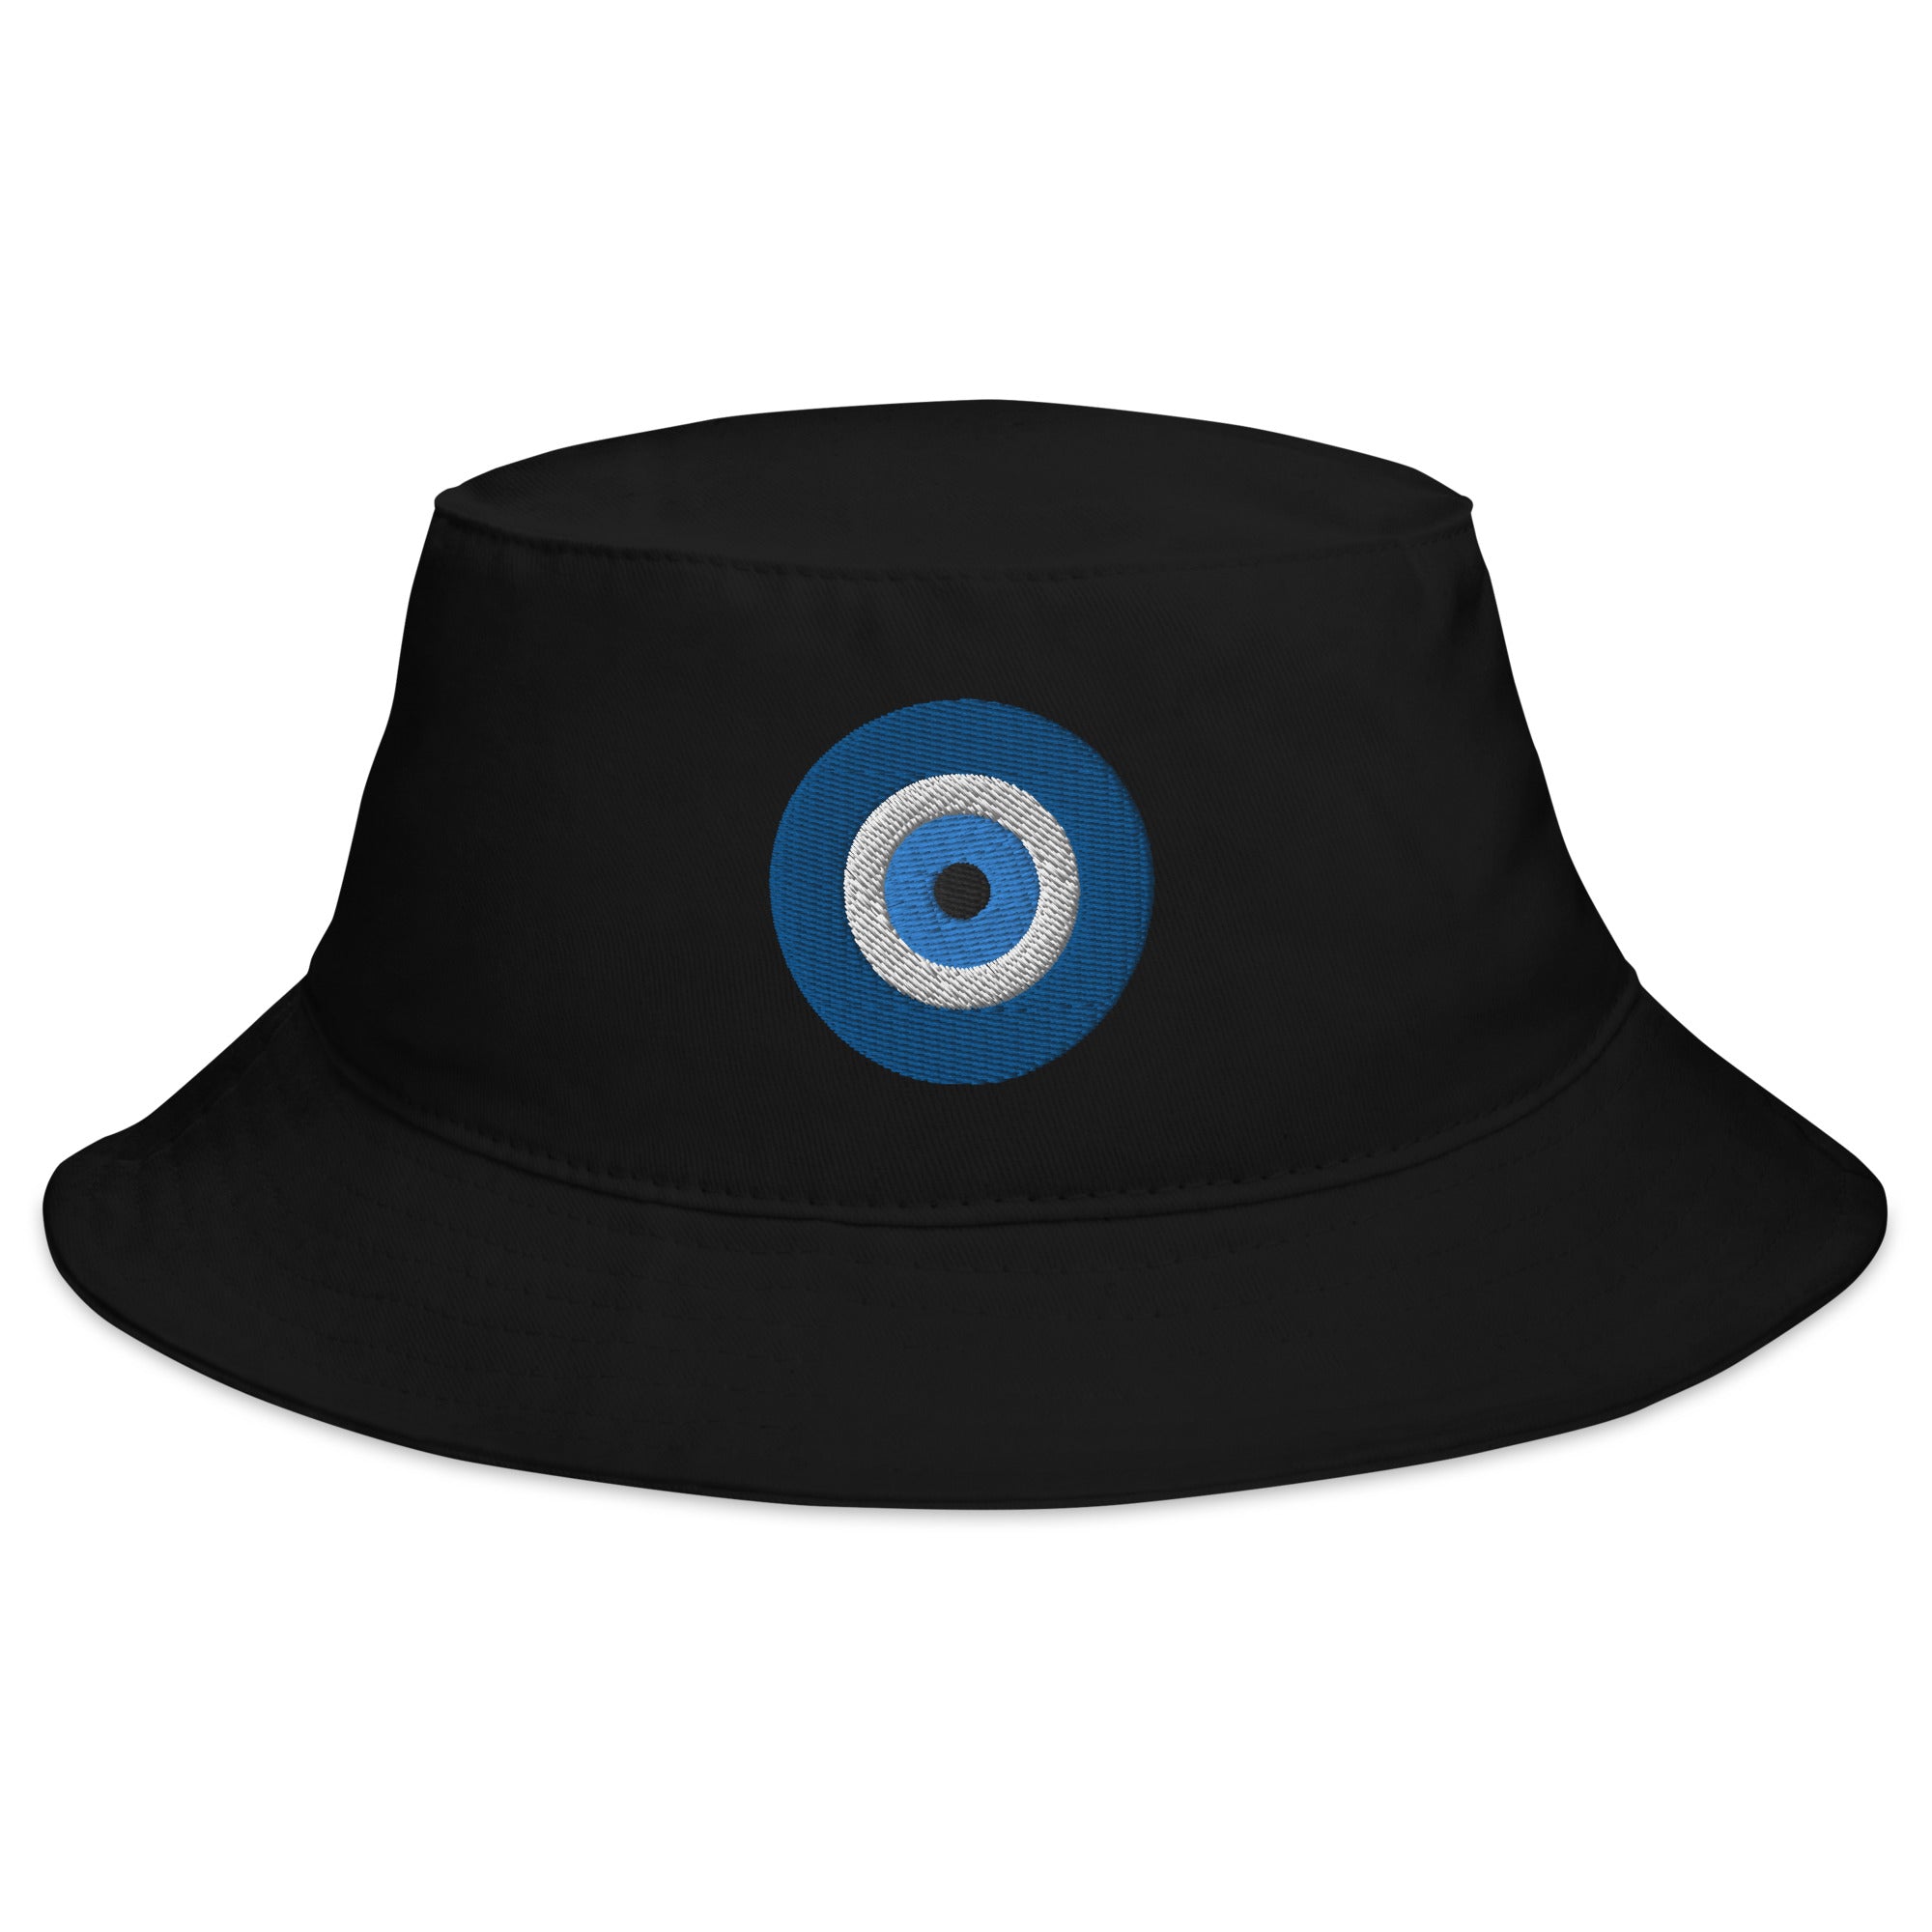 The Evil Eye Embroidered Bucket Hat Supernatural Look or Stare